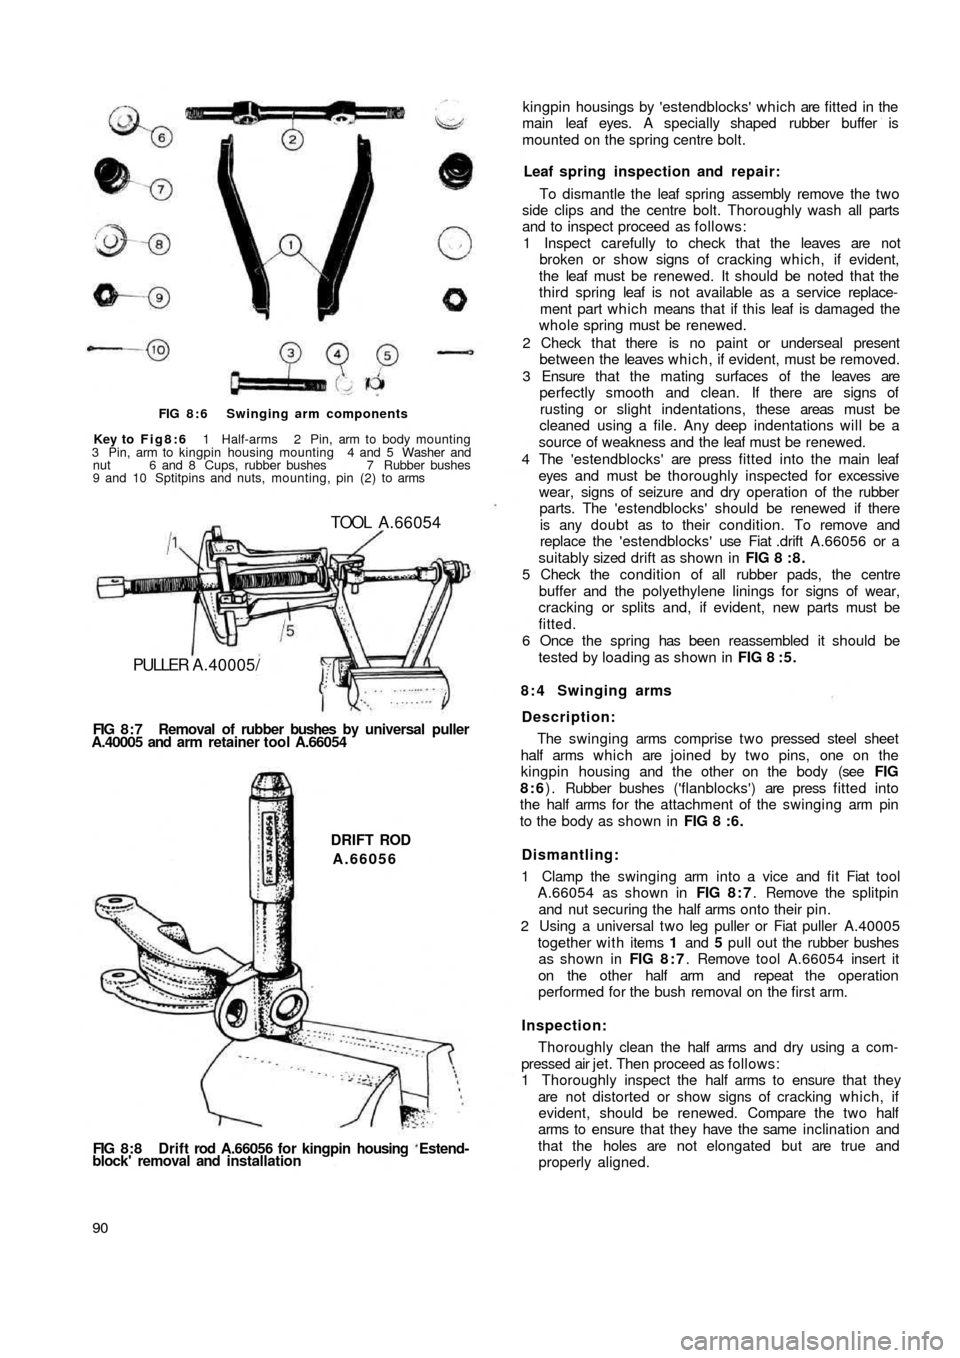 FIAT 500 1970 1.G Manual Online FIG 8:6  Swinging arm components
Key to  Fig8:6  1  Half-arms  2  Pin, arm to body mounting
3 Pin, arm to kingpin housing mounting 4 and 5 Washer and
nut 6 and 8 Cups, rubber bushes 7 Rubber bushes
9 